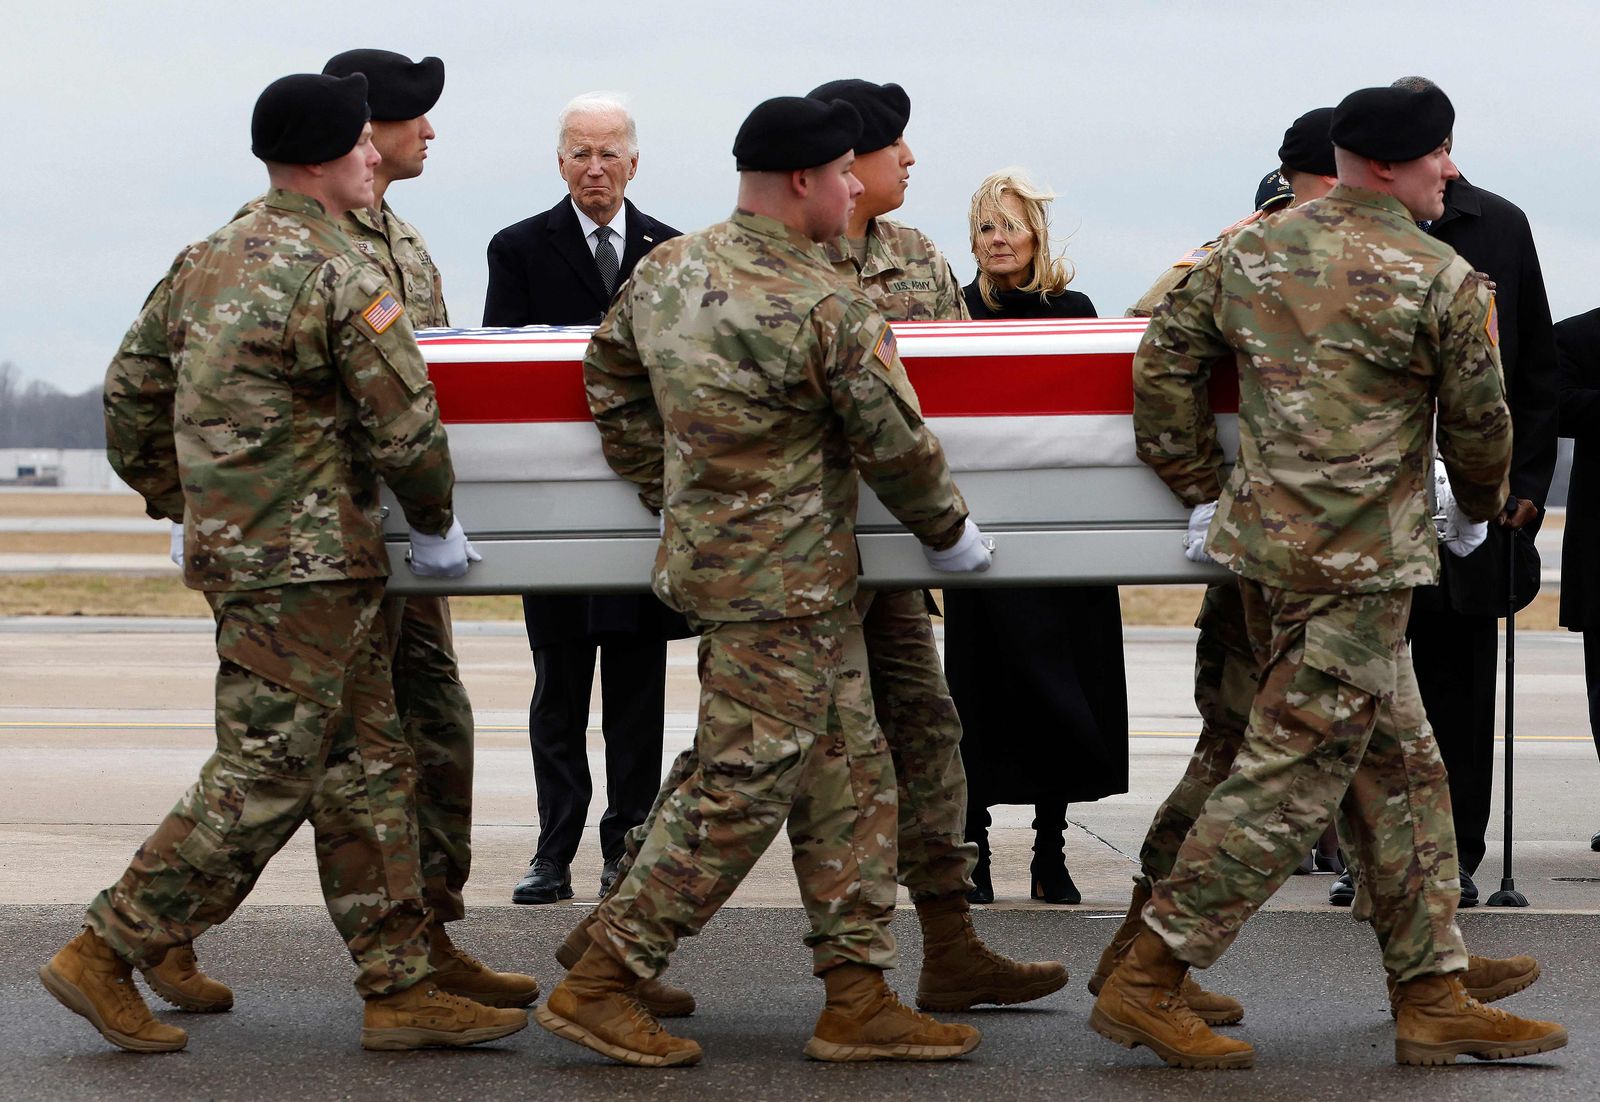 DOVER, DELAWARE - FEBRUARY 02: U.S. President Joe Biden and first lady Jill Biden pay their respects as a U.S. Army carry team moves a flagged dragged transfer case containing the remains of Army Sgt. William Rivers during a dignified transfer at Dover Air Force Base on February 02, 2024 in Dover, Delaware. U.S. Army Sgt. William Rivers, Sgt. Breonna Moffett, Sgt. Kennedy Sanders were killed in addition to 40 others troops were injured during a drone strike in Jordan.   Kevin Dietsch/Getty Images/AFP (Photo by Kevin Dietsch / GETTY IMAGES NORTH AMERICA / Getty Images via AFP)